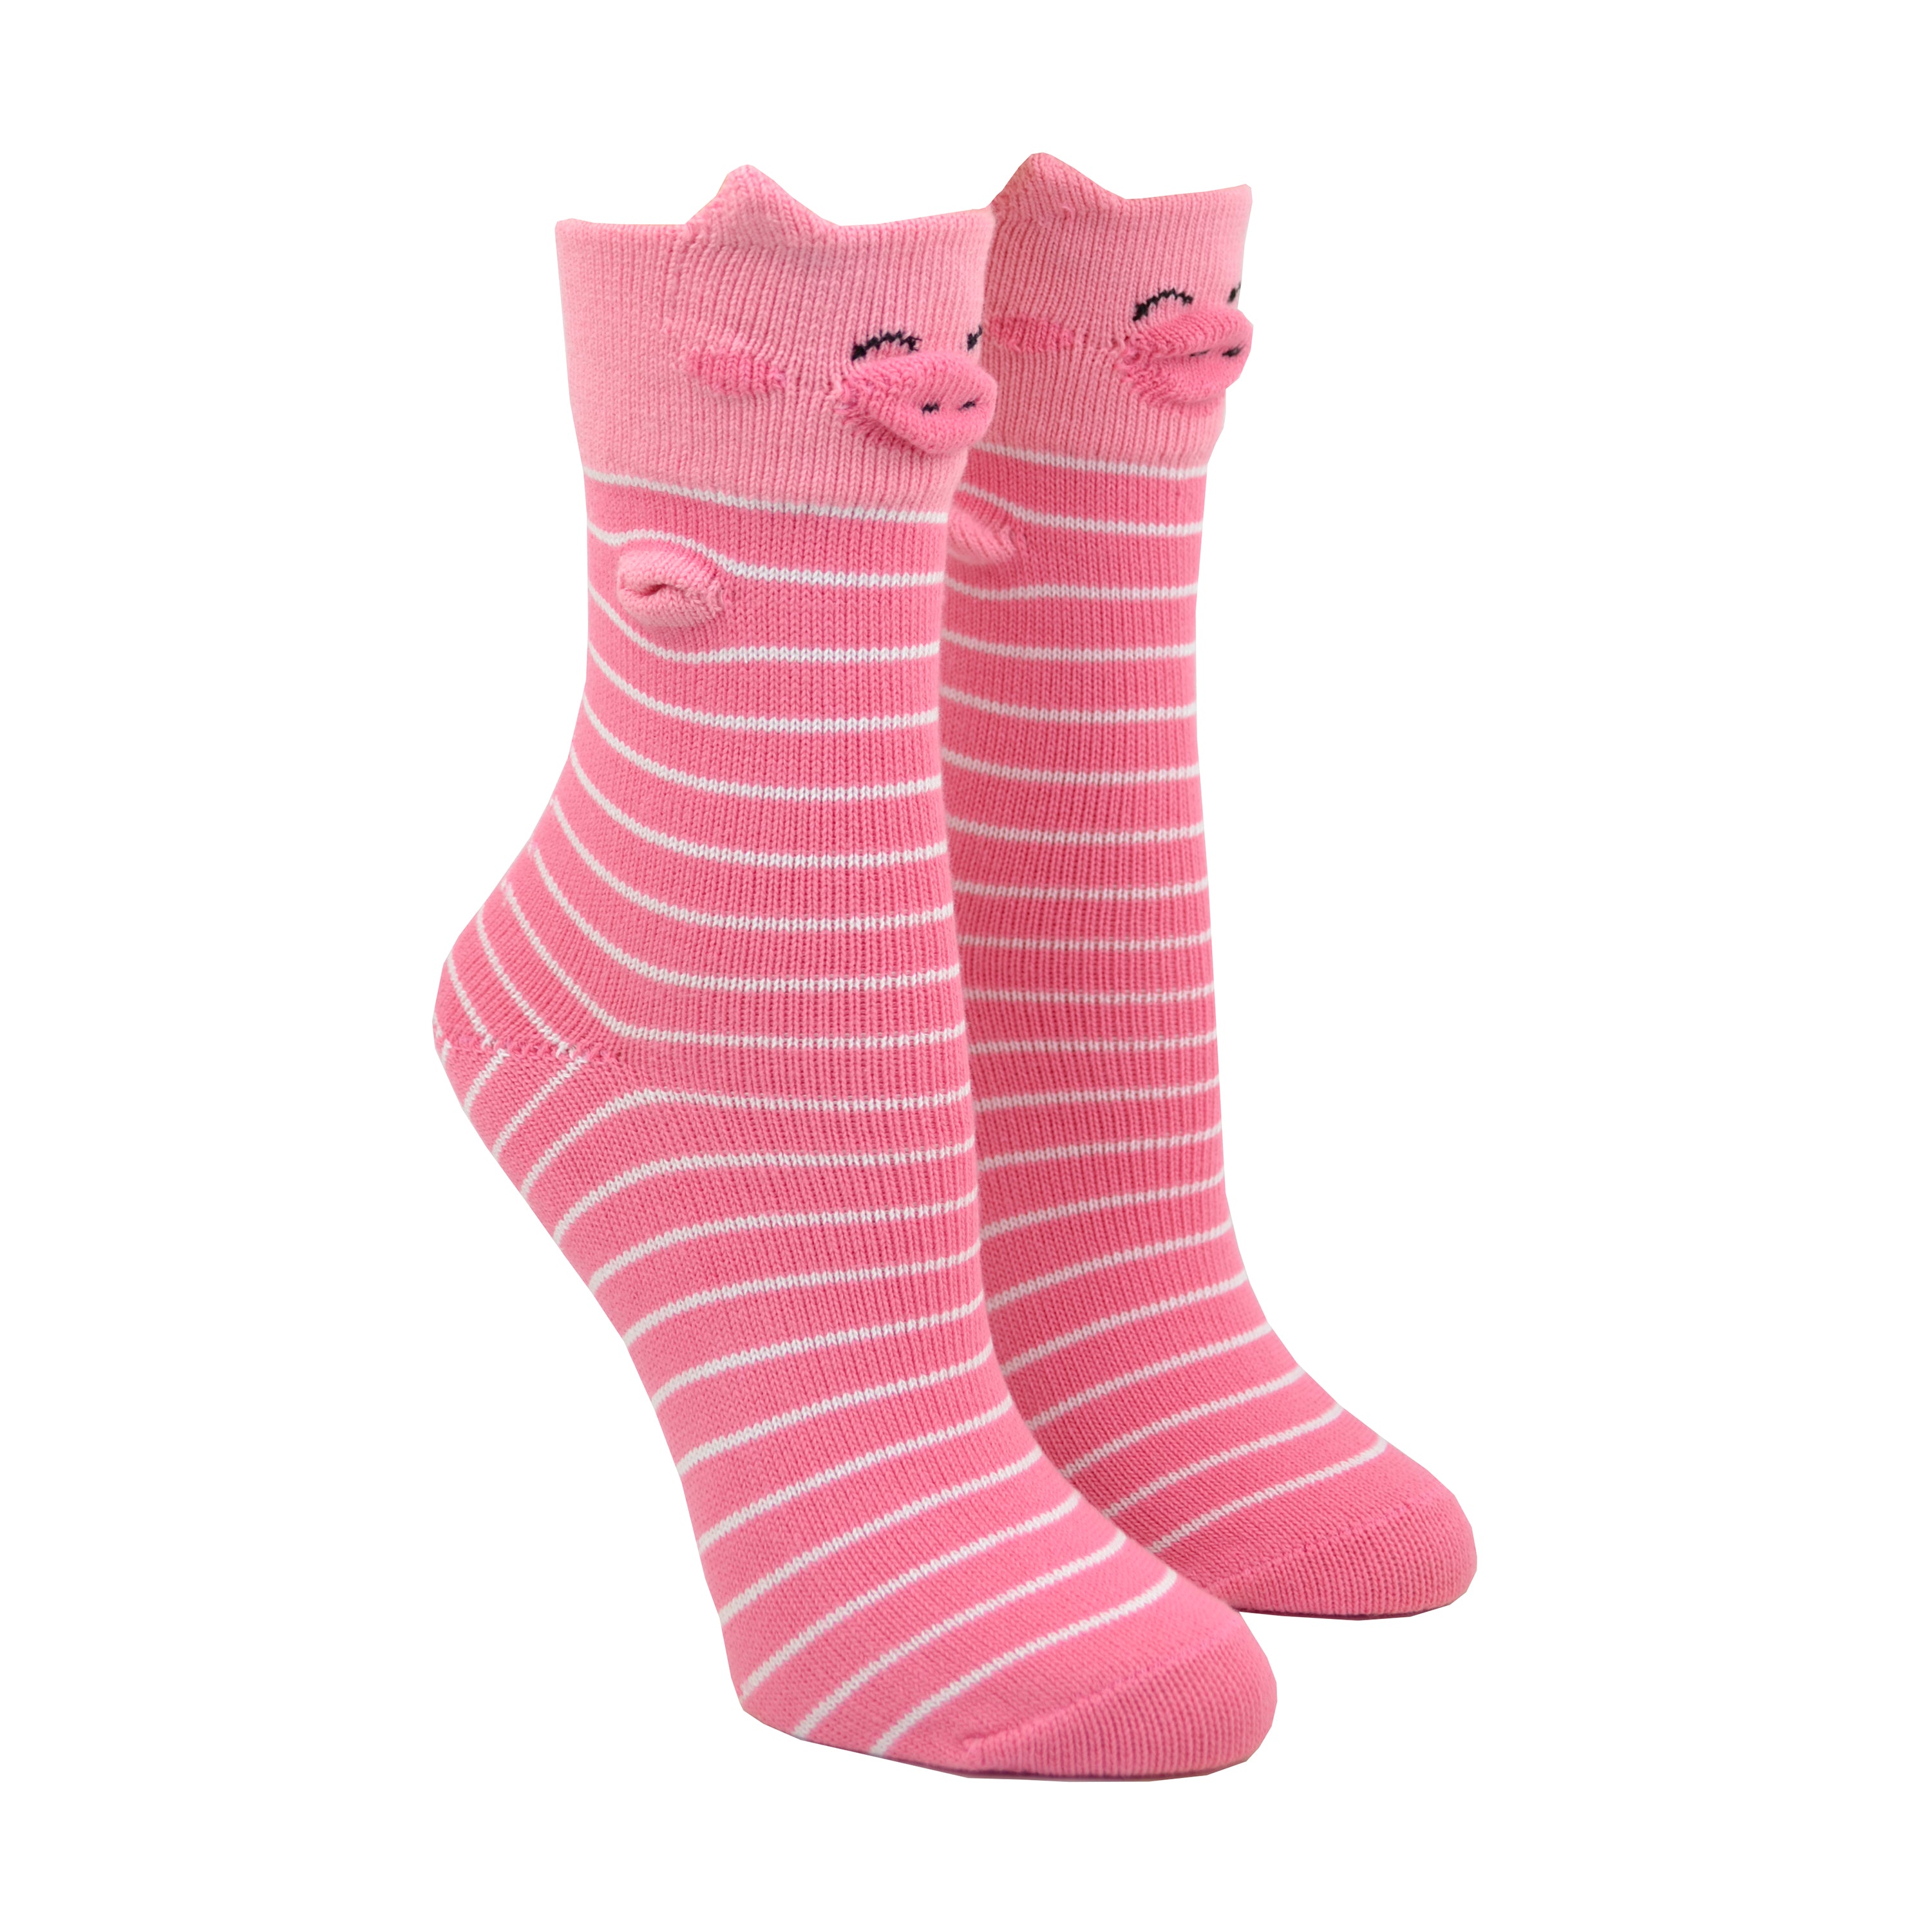 Shown on a foot mold, a pair of Foot Traffic, pink and white cotton women's crew socks with three dimensional pattern of cute pig